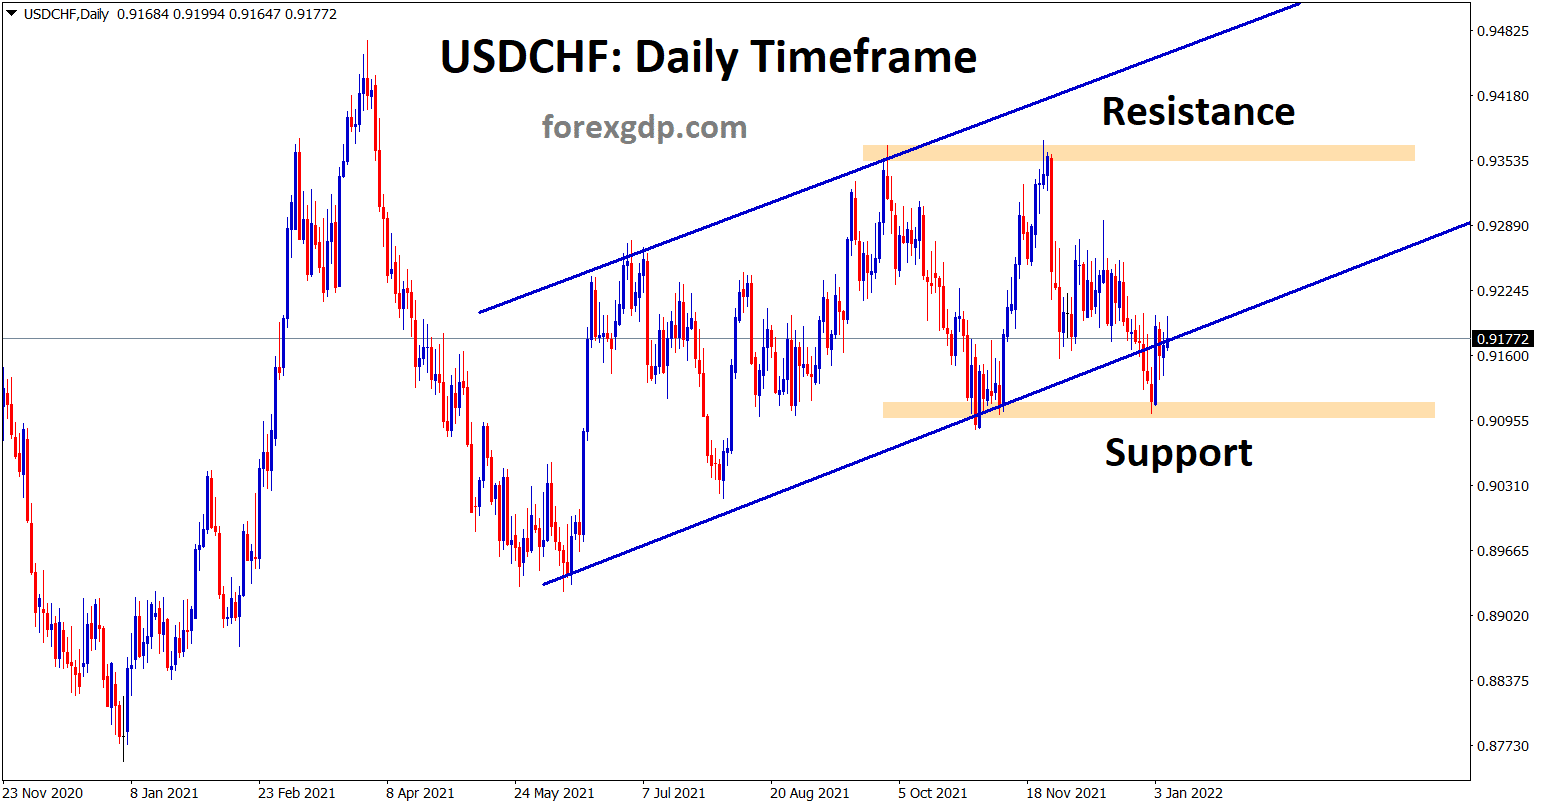 USDCHF rebounding from the horizontal support area